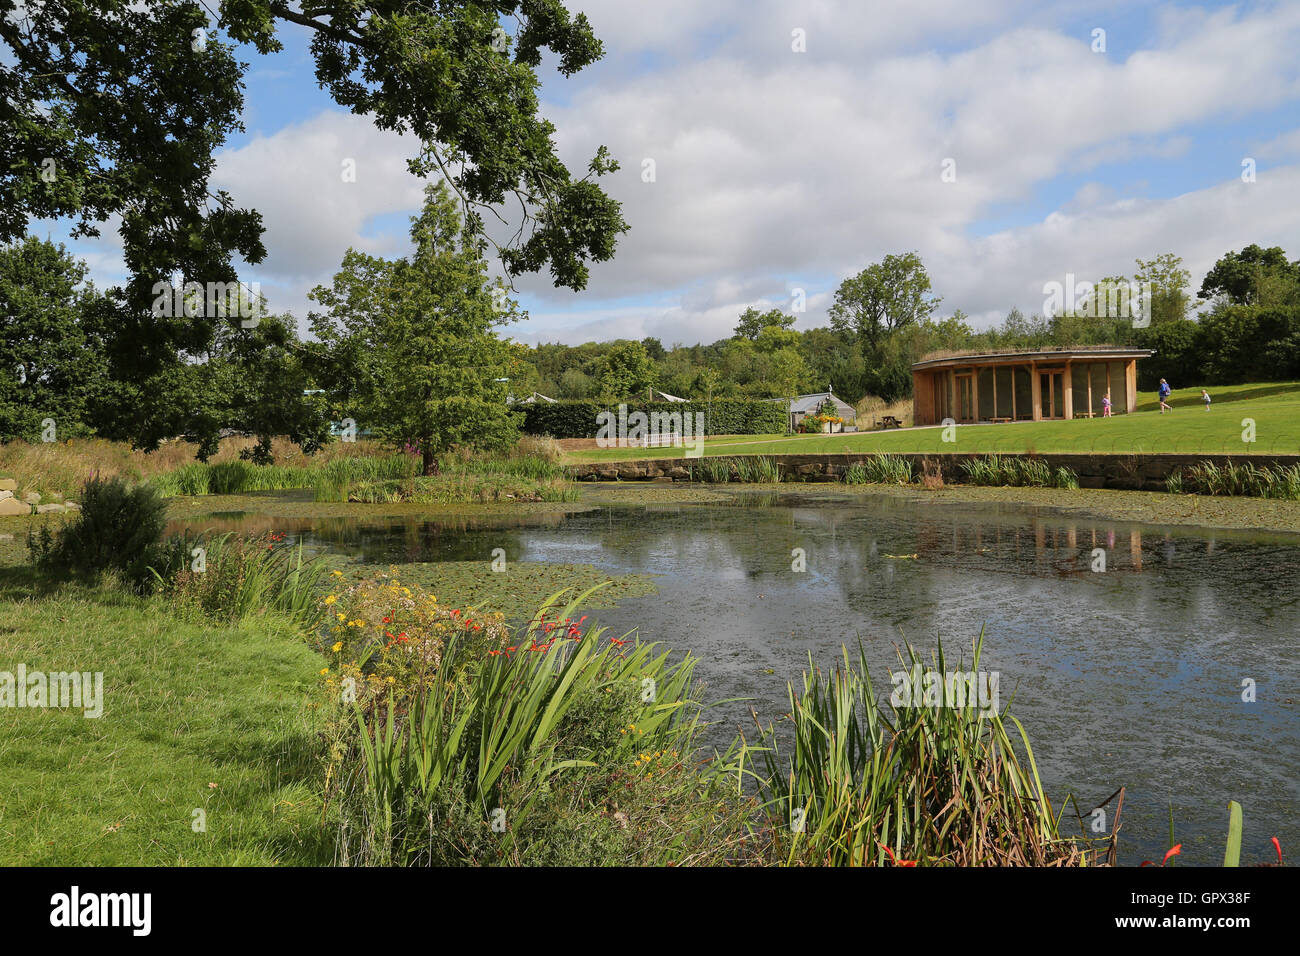 Harrogate, UK. The Queen Mother's lake at RHS Garden Harlow Carr in Harrogate, North Yorkshire. Today marks the first day of aut Stock Photo